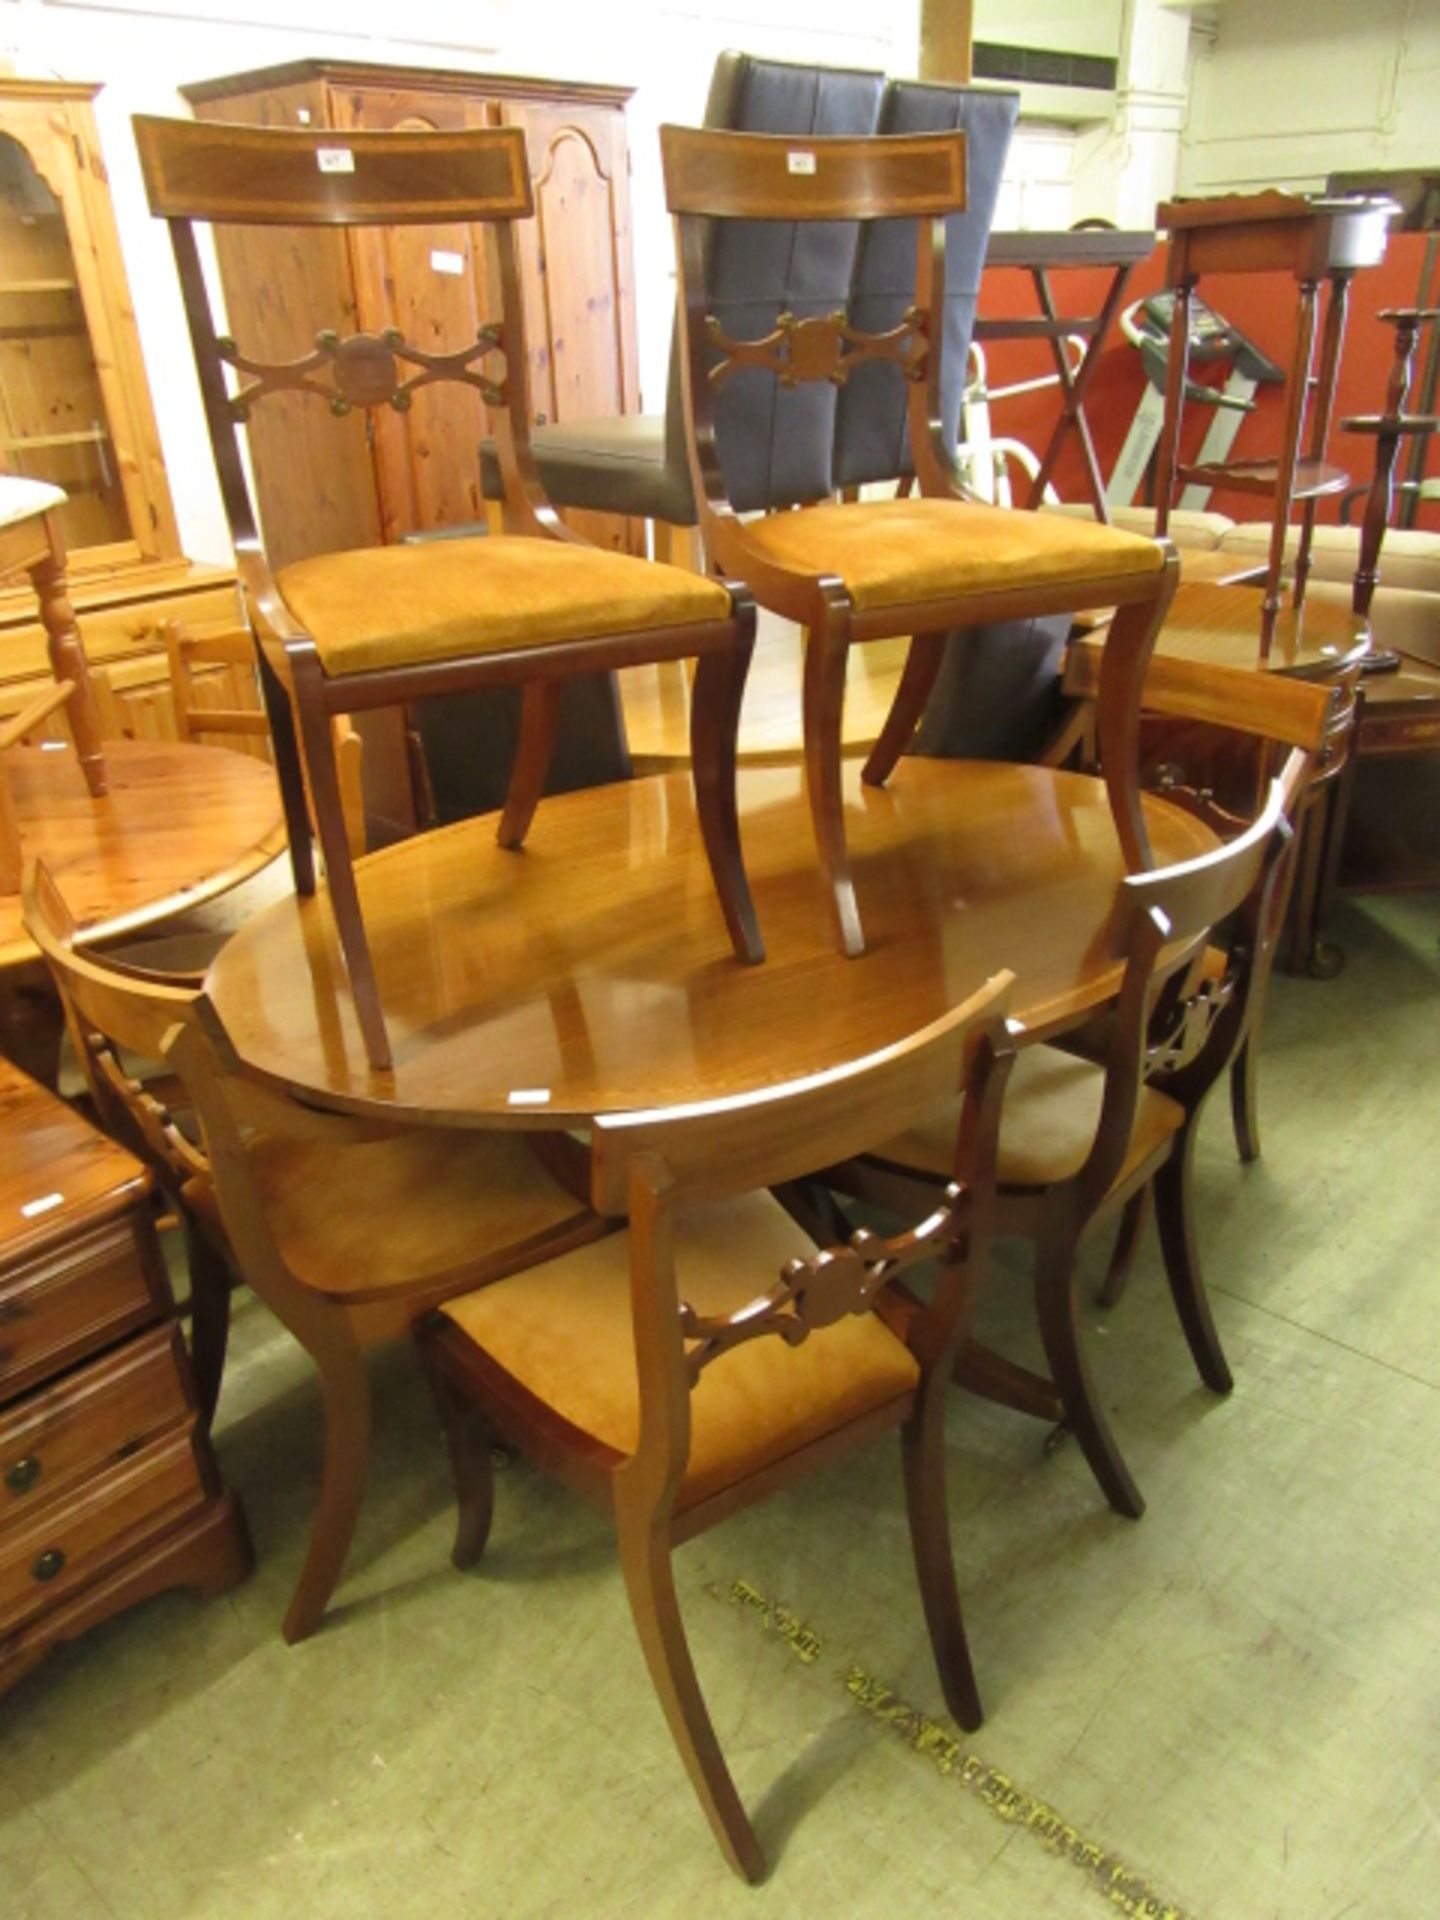 A reproduction mahogany single pedestal dining table along with a set of six (4+2) dining chairs